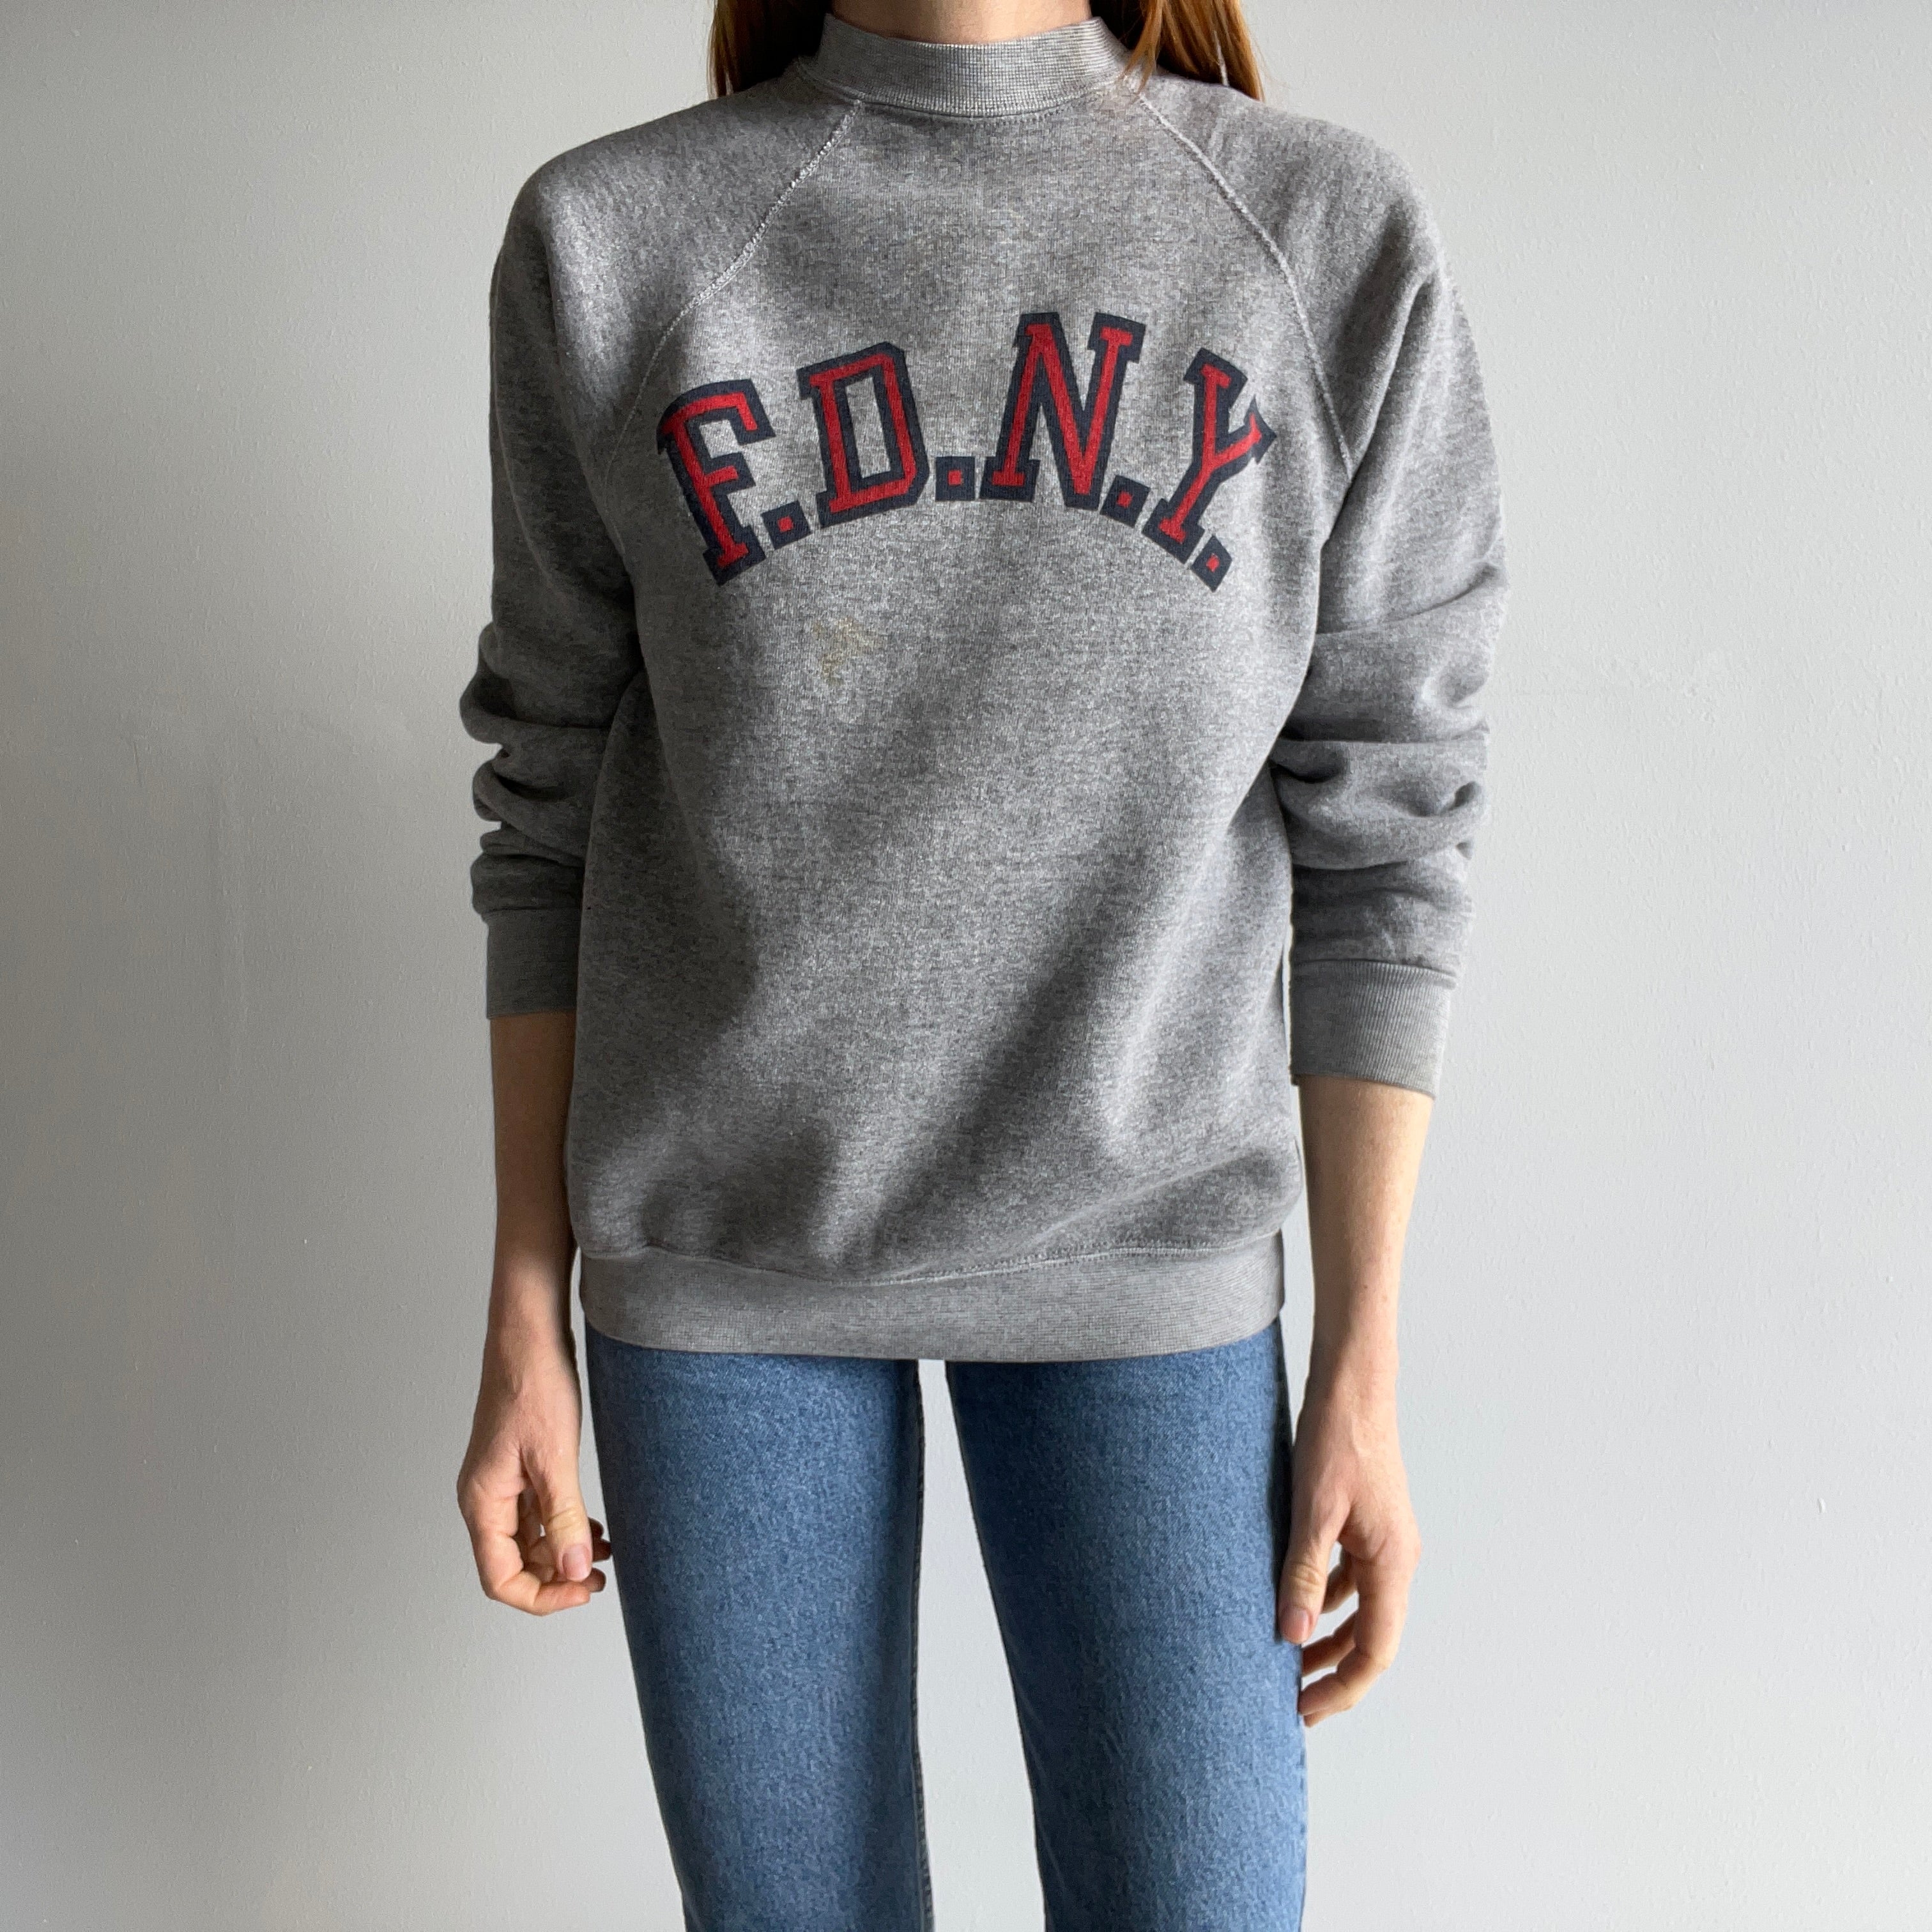 1980s FDNY Sweatshirt by Discus - WOW